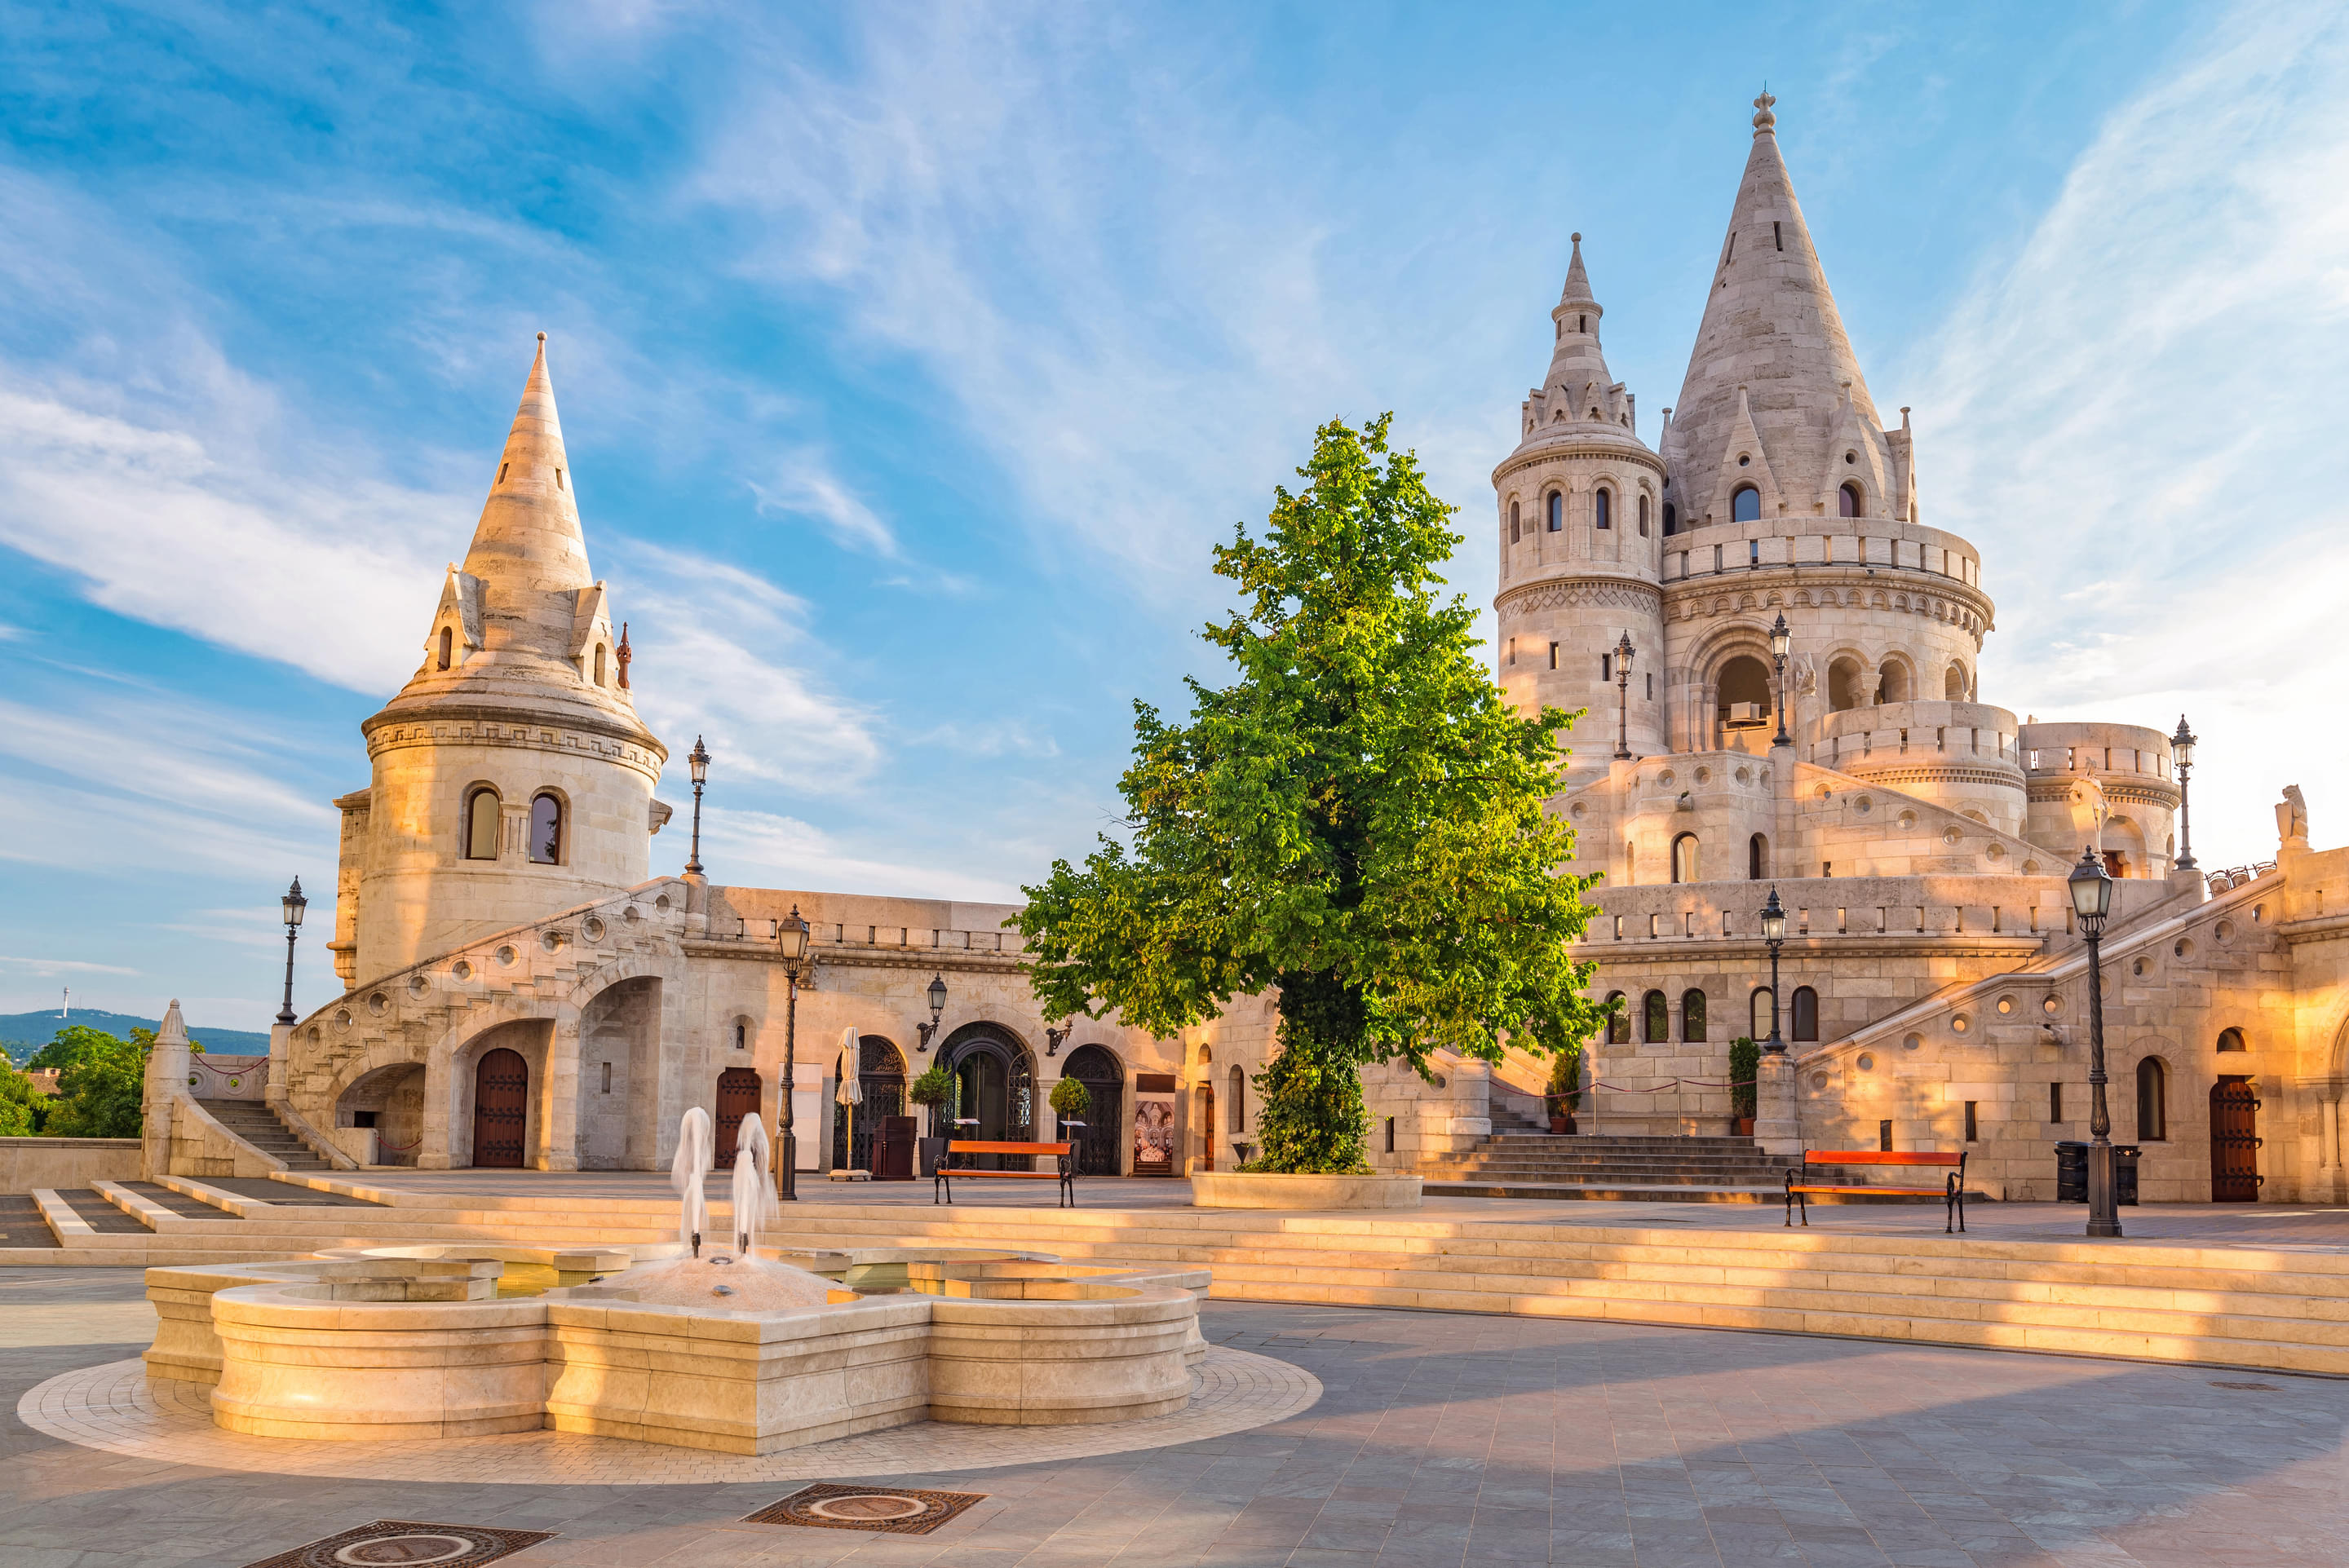 Fisherman Bastion Overview